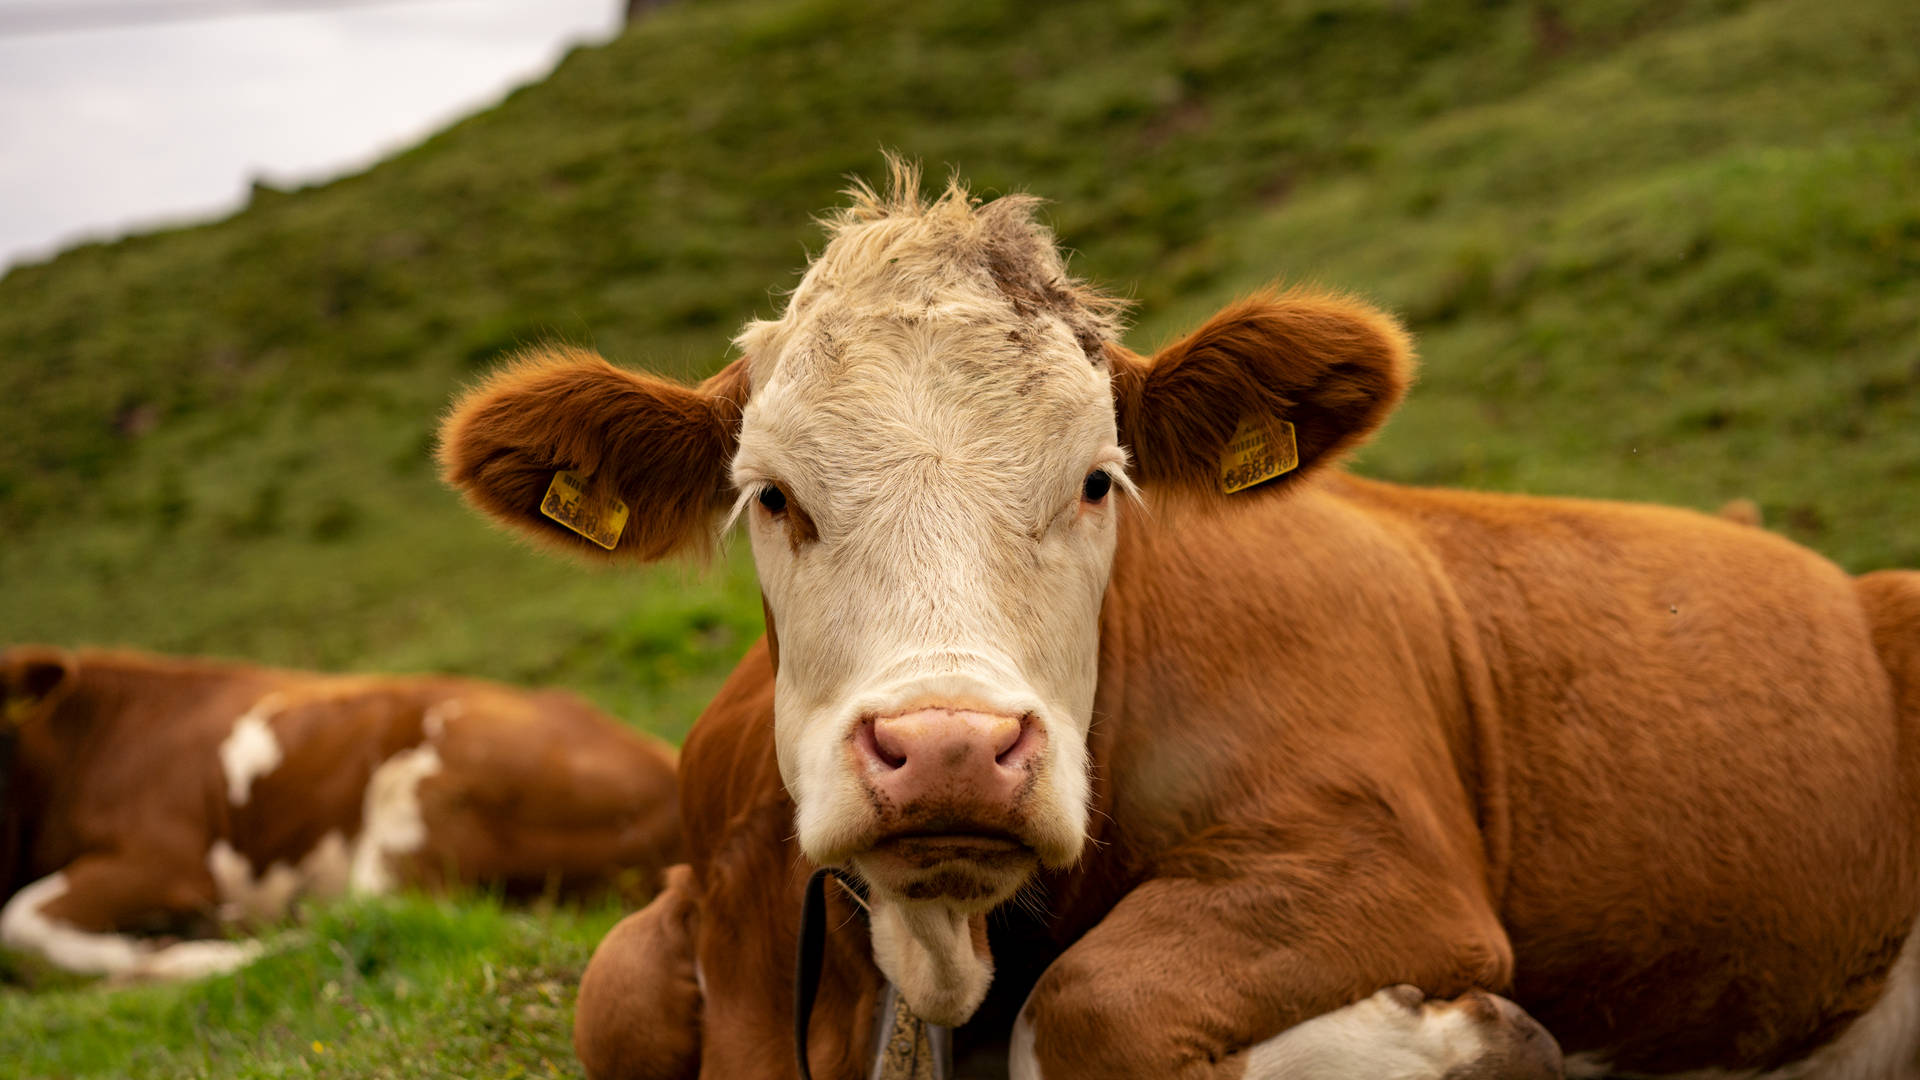 Cute Cow With White Face And Brown Body